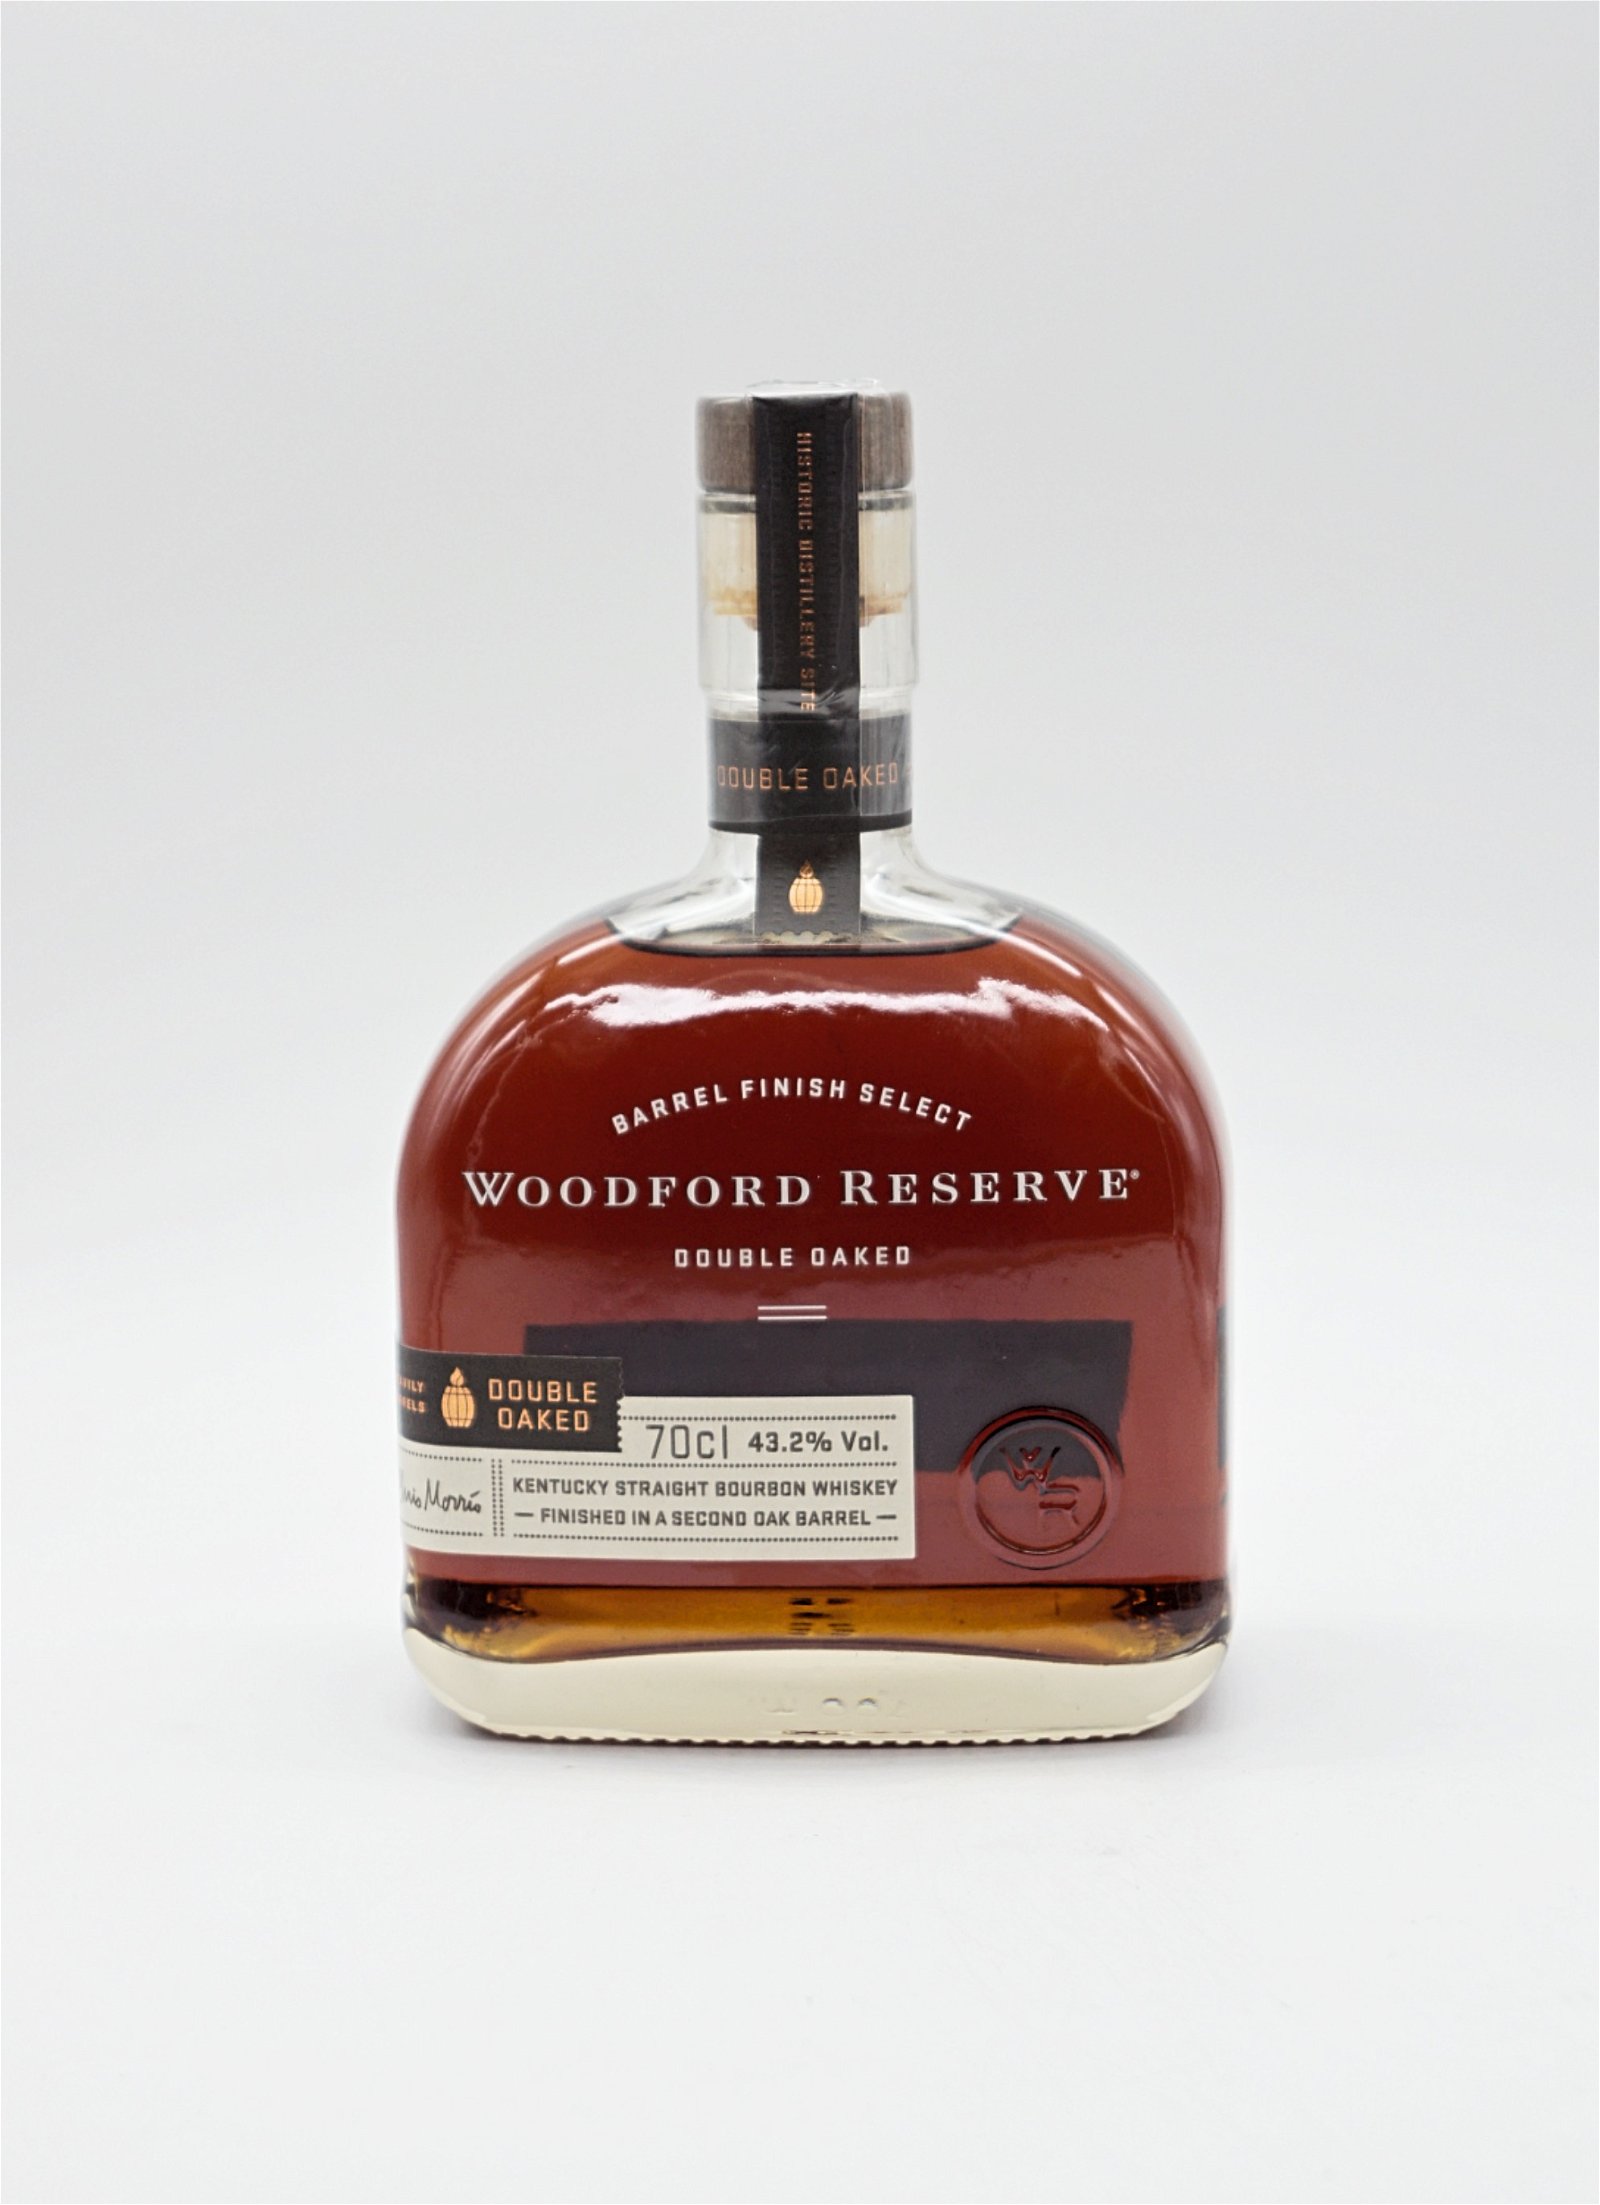 Woodford Reserve Double Oaked Barrel Finish Select Kentucky Straight Bourbon Whiskey